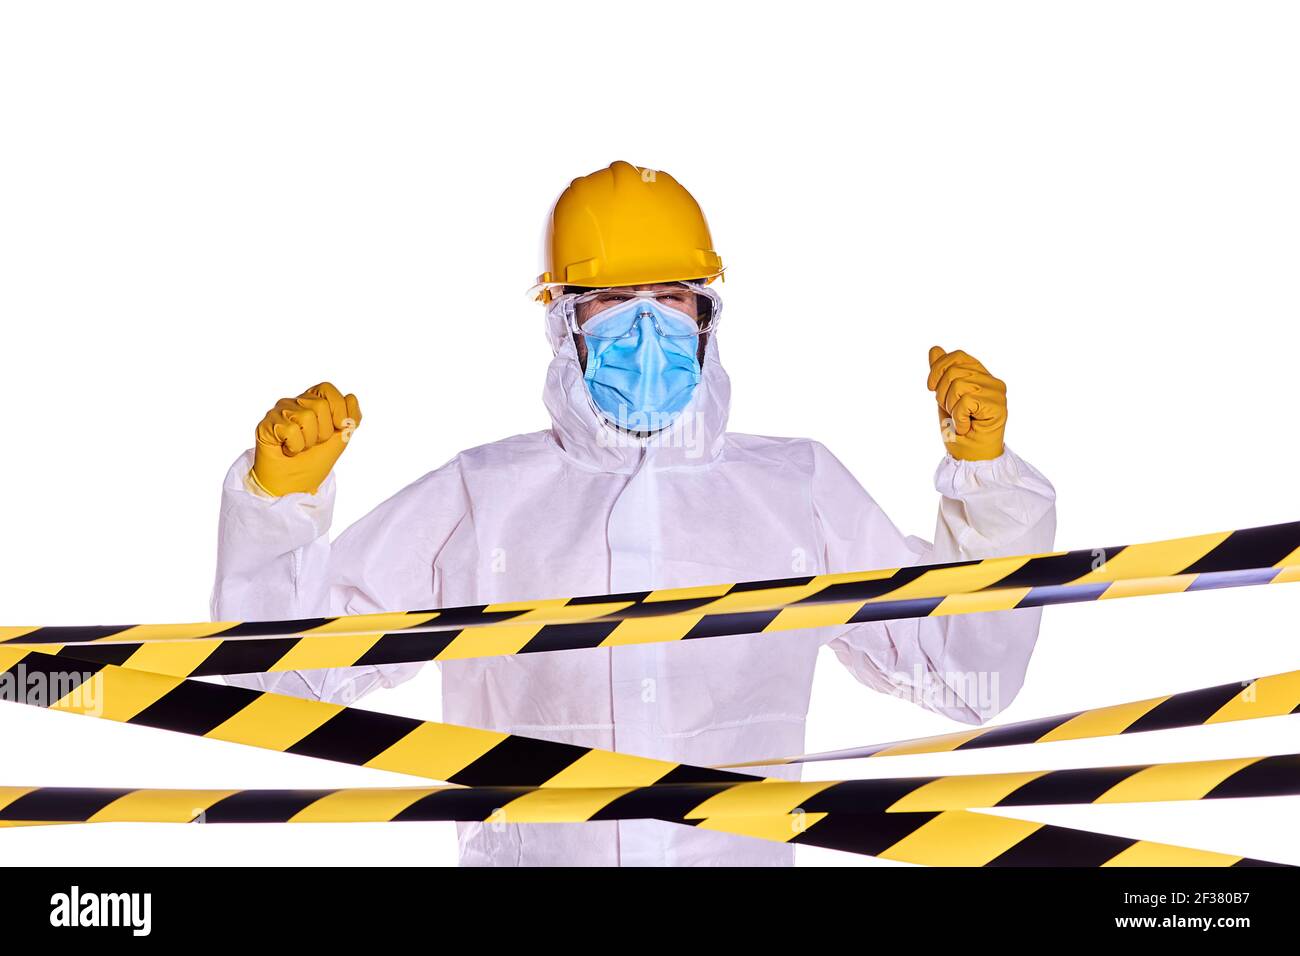 Health worker for corona virus pandemic, wearing protective clothing, screaming with anger and waving arms angrily Stock Photo